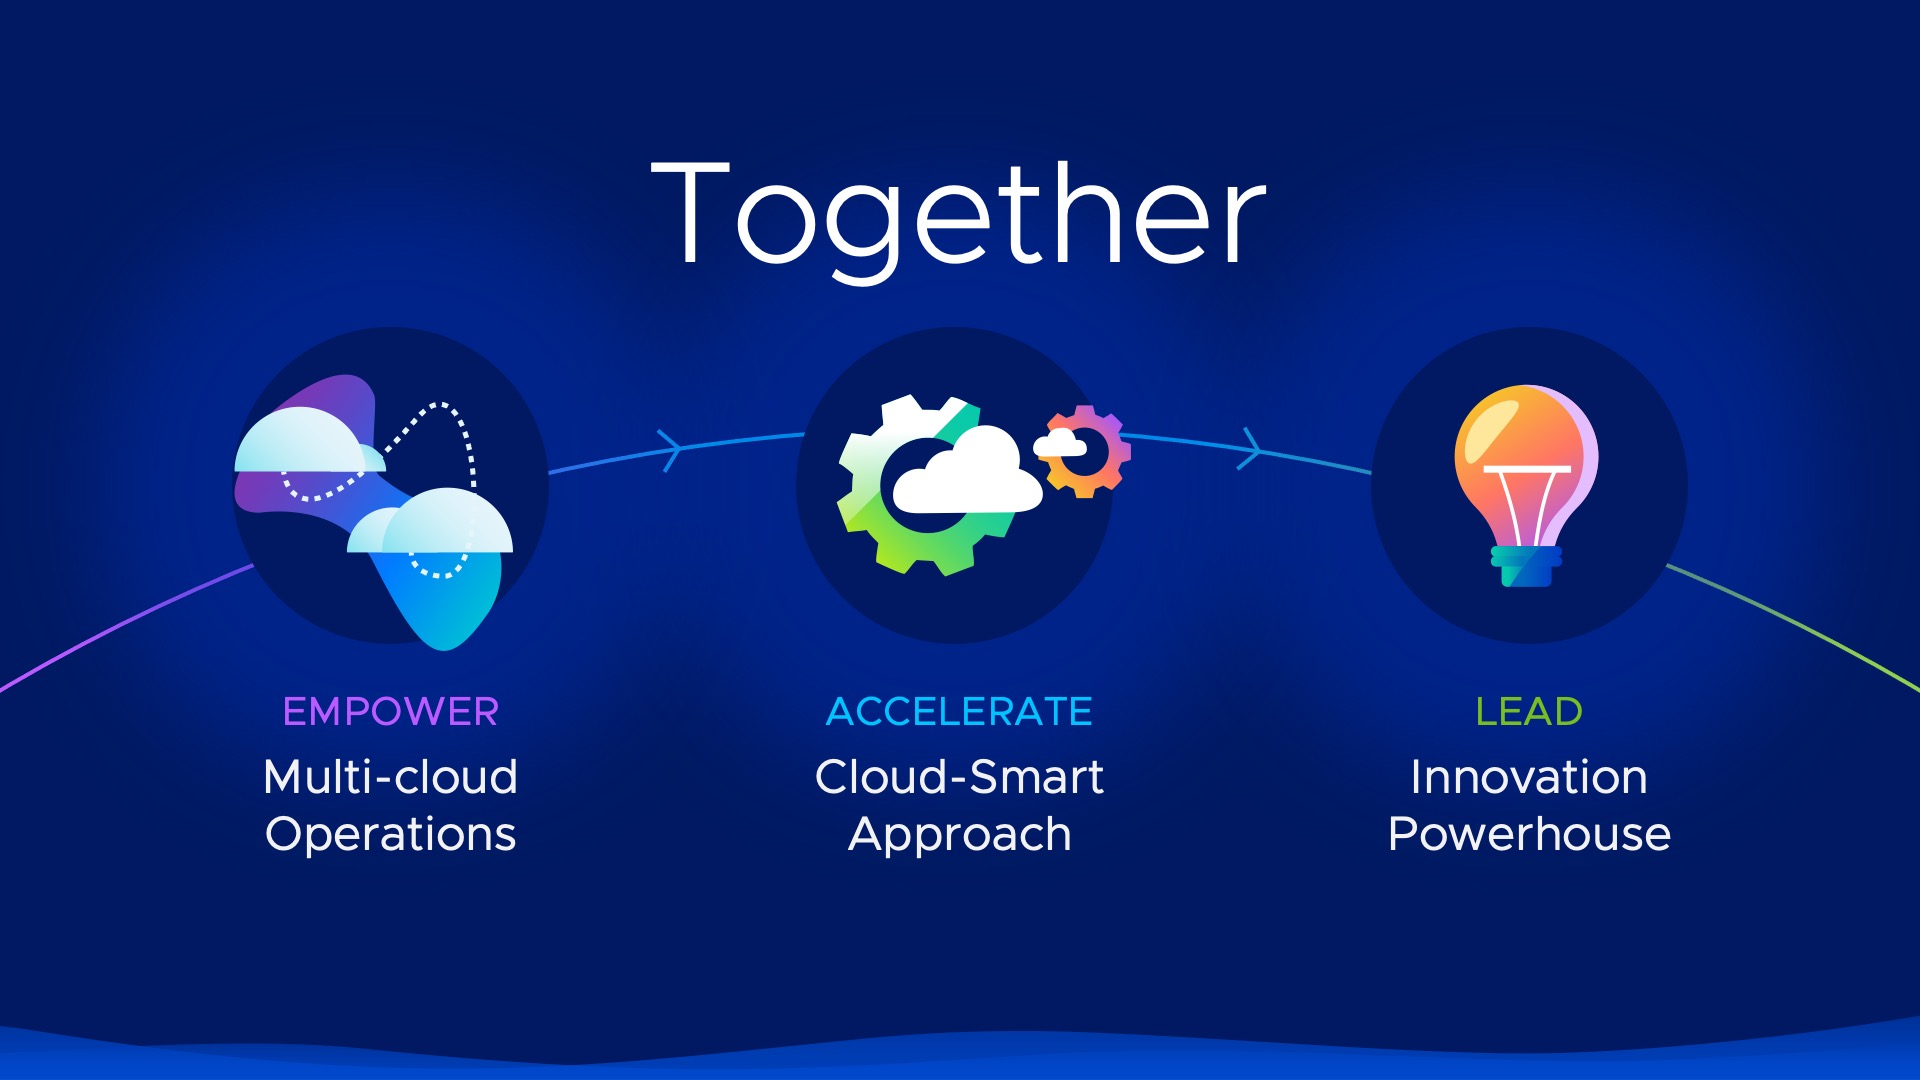 A design for a VMware event presentation that has three icons and text that says "empower, accelerate, and lead."